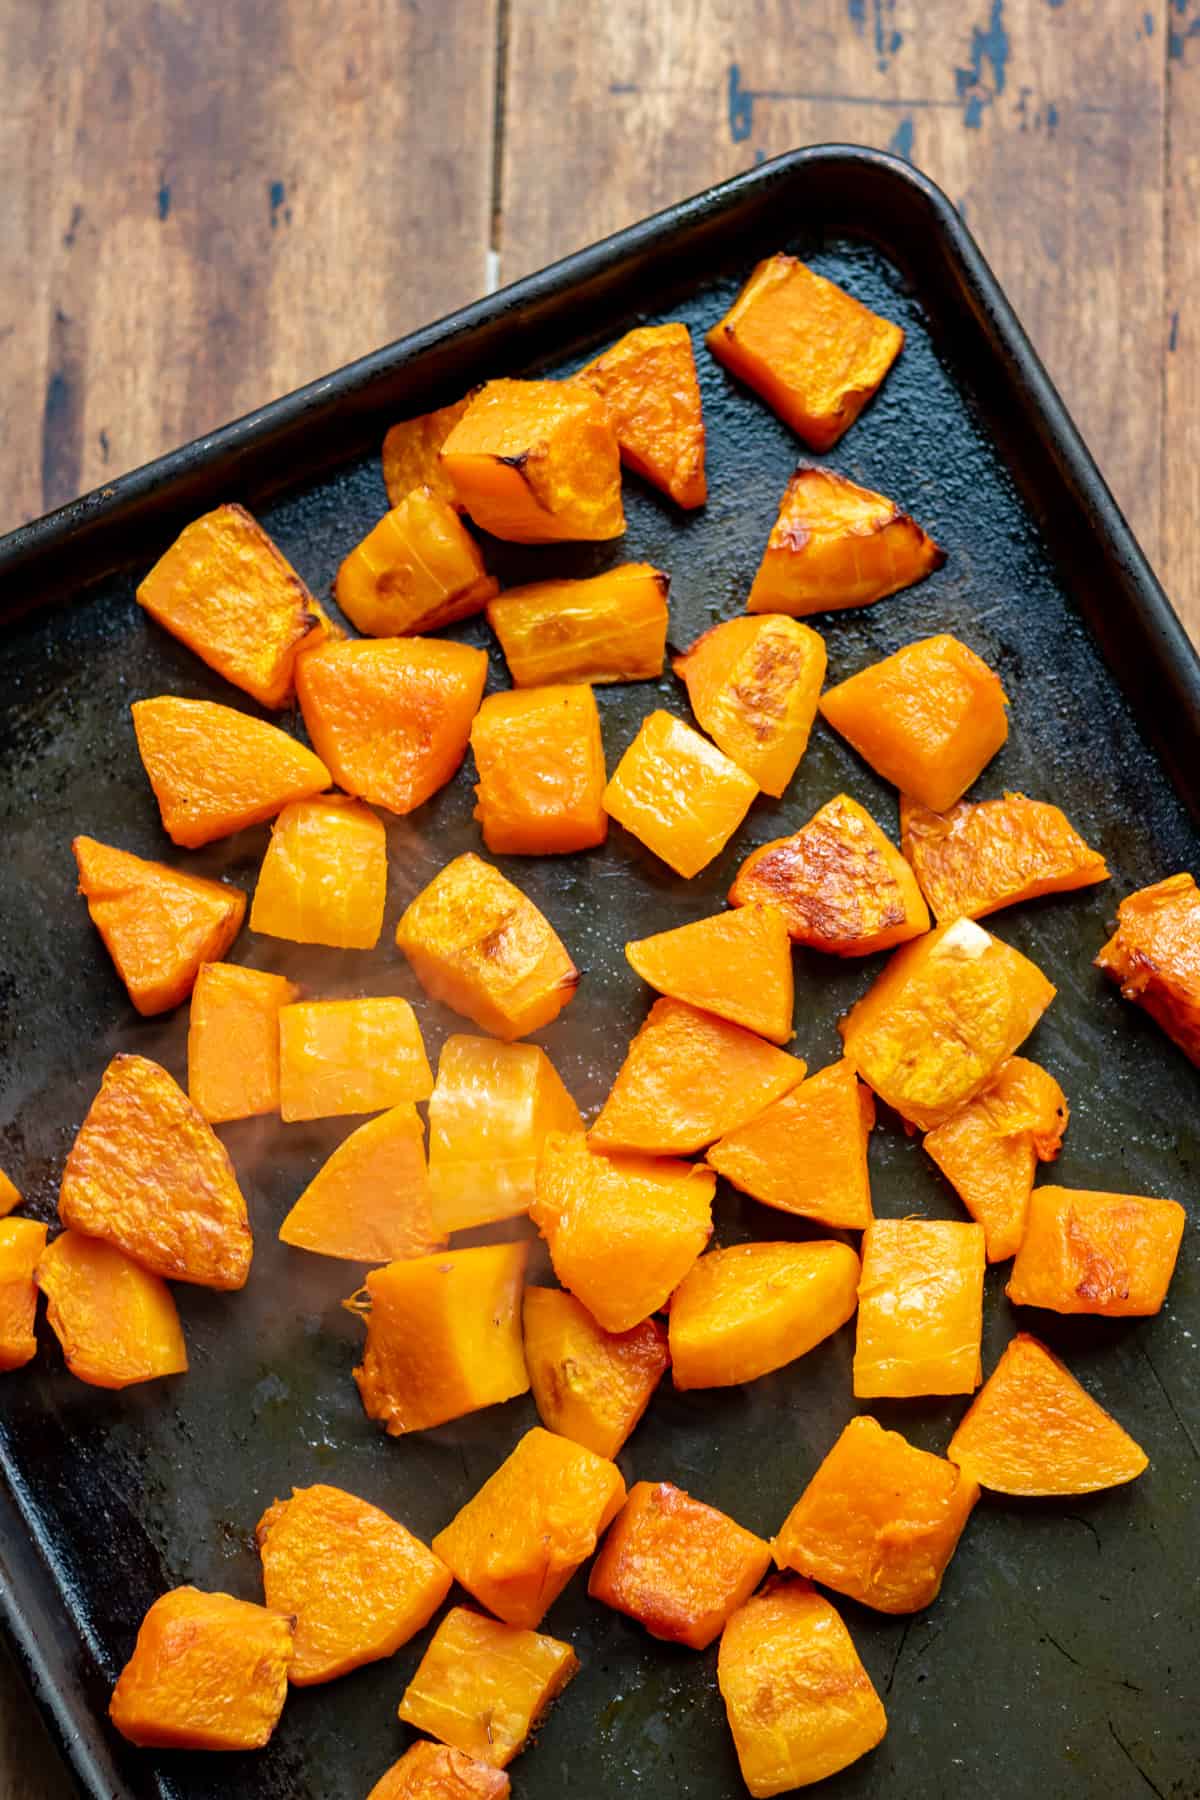 Roasted squash on a tray.